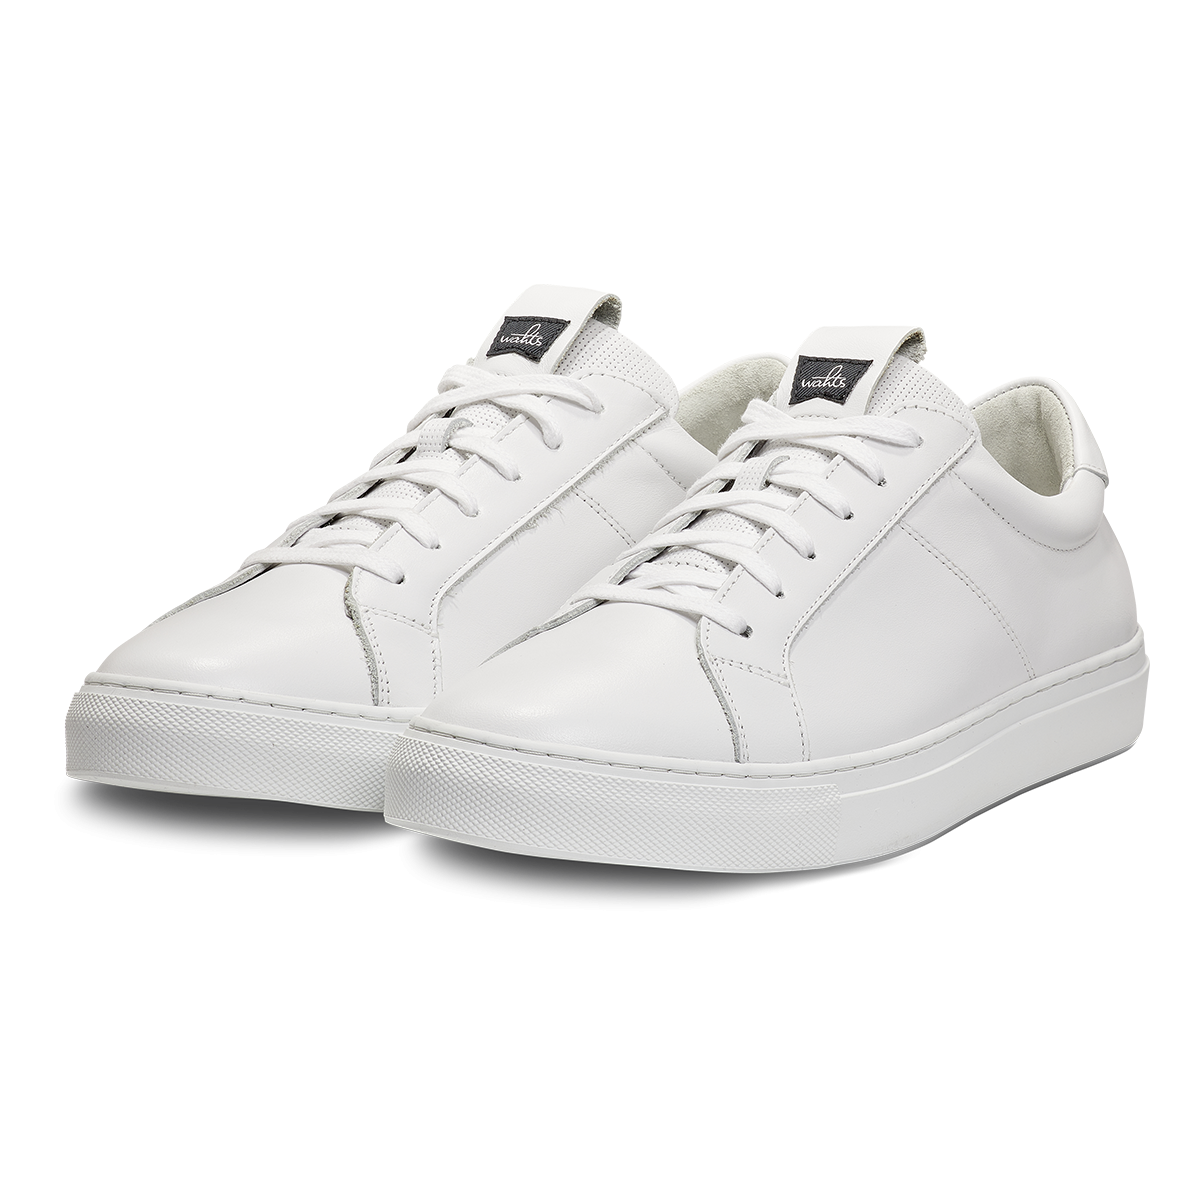 8 of the best white sneakers for men | The Coolector